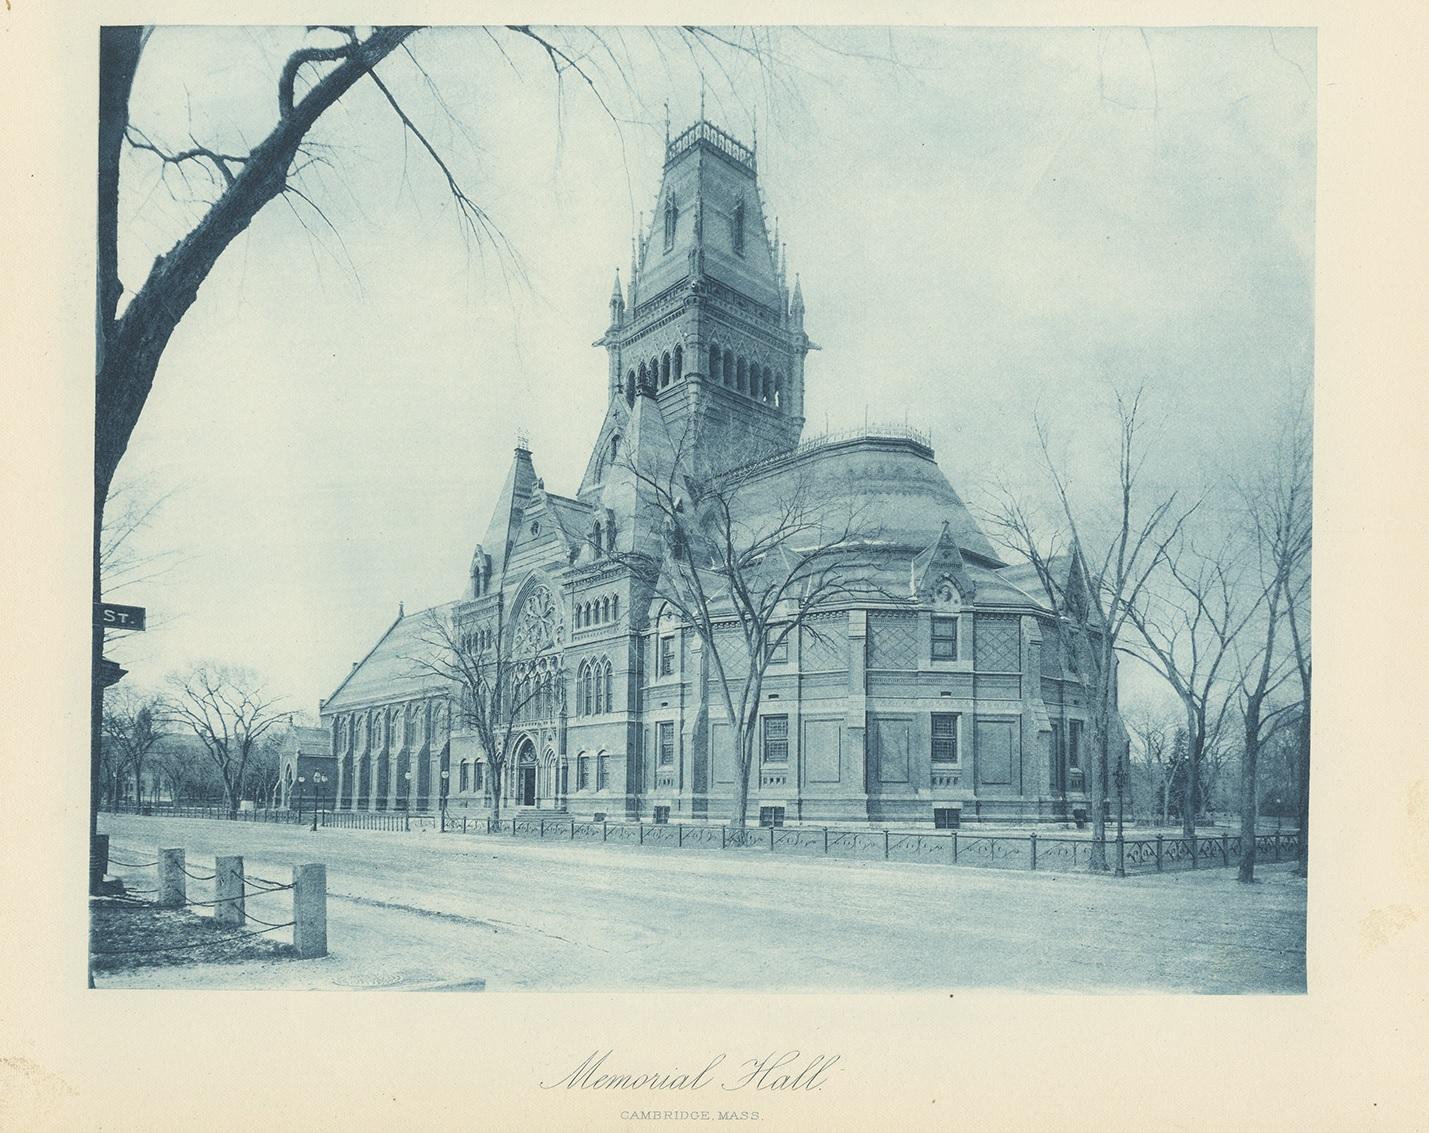 Antique print titled 'Memorial Hall, Cambridge Mass'. View of Memorial Hall, Cambridge, Massachusetts. This print originates from 'Voyages and Travels Illustrated' published by E. W. Walker & Co.